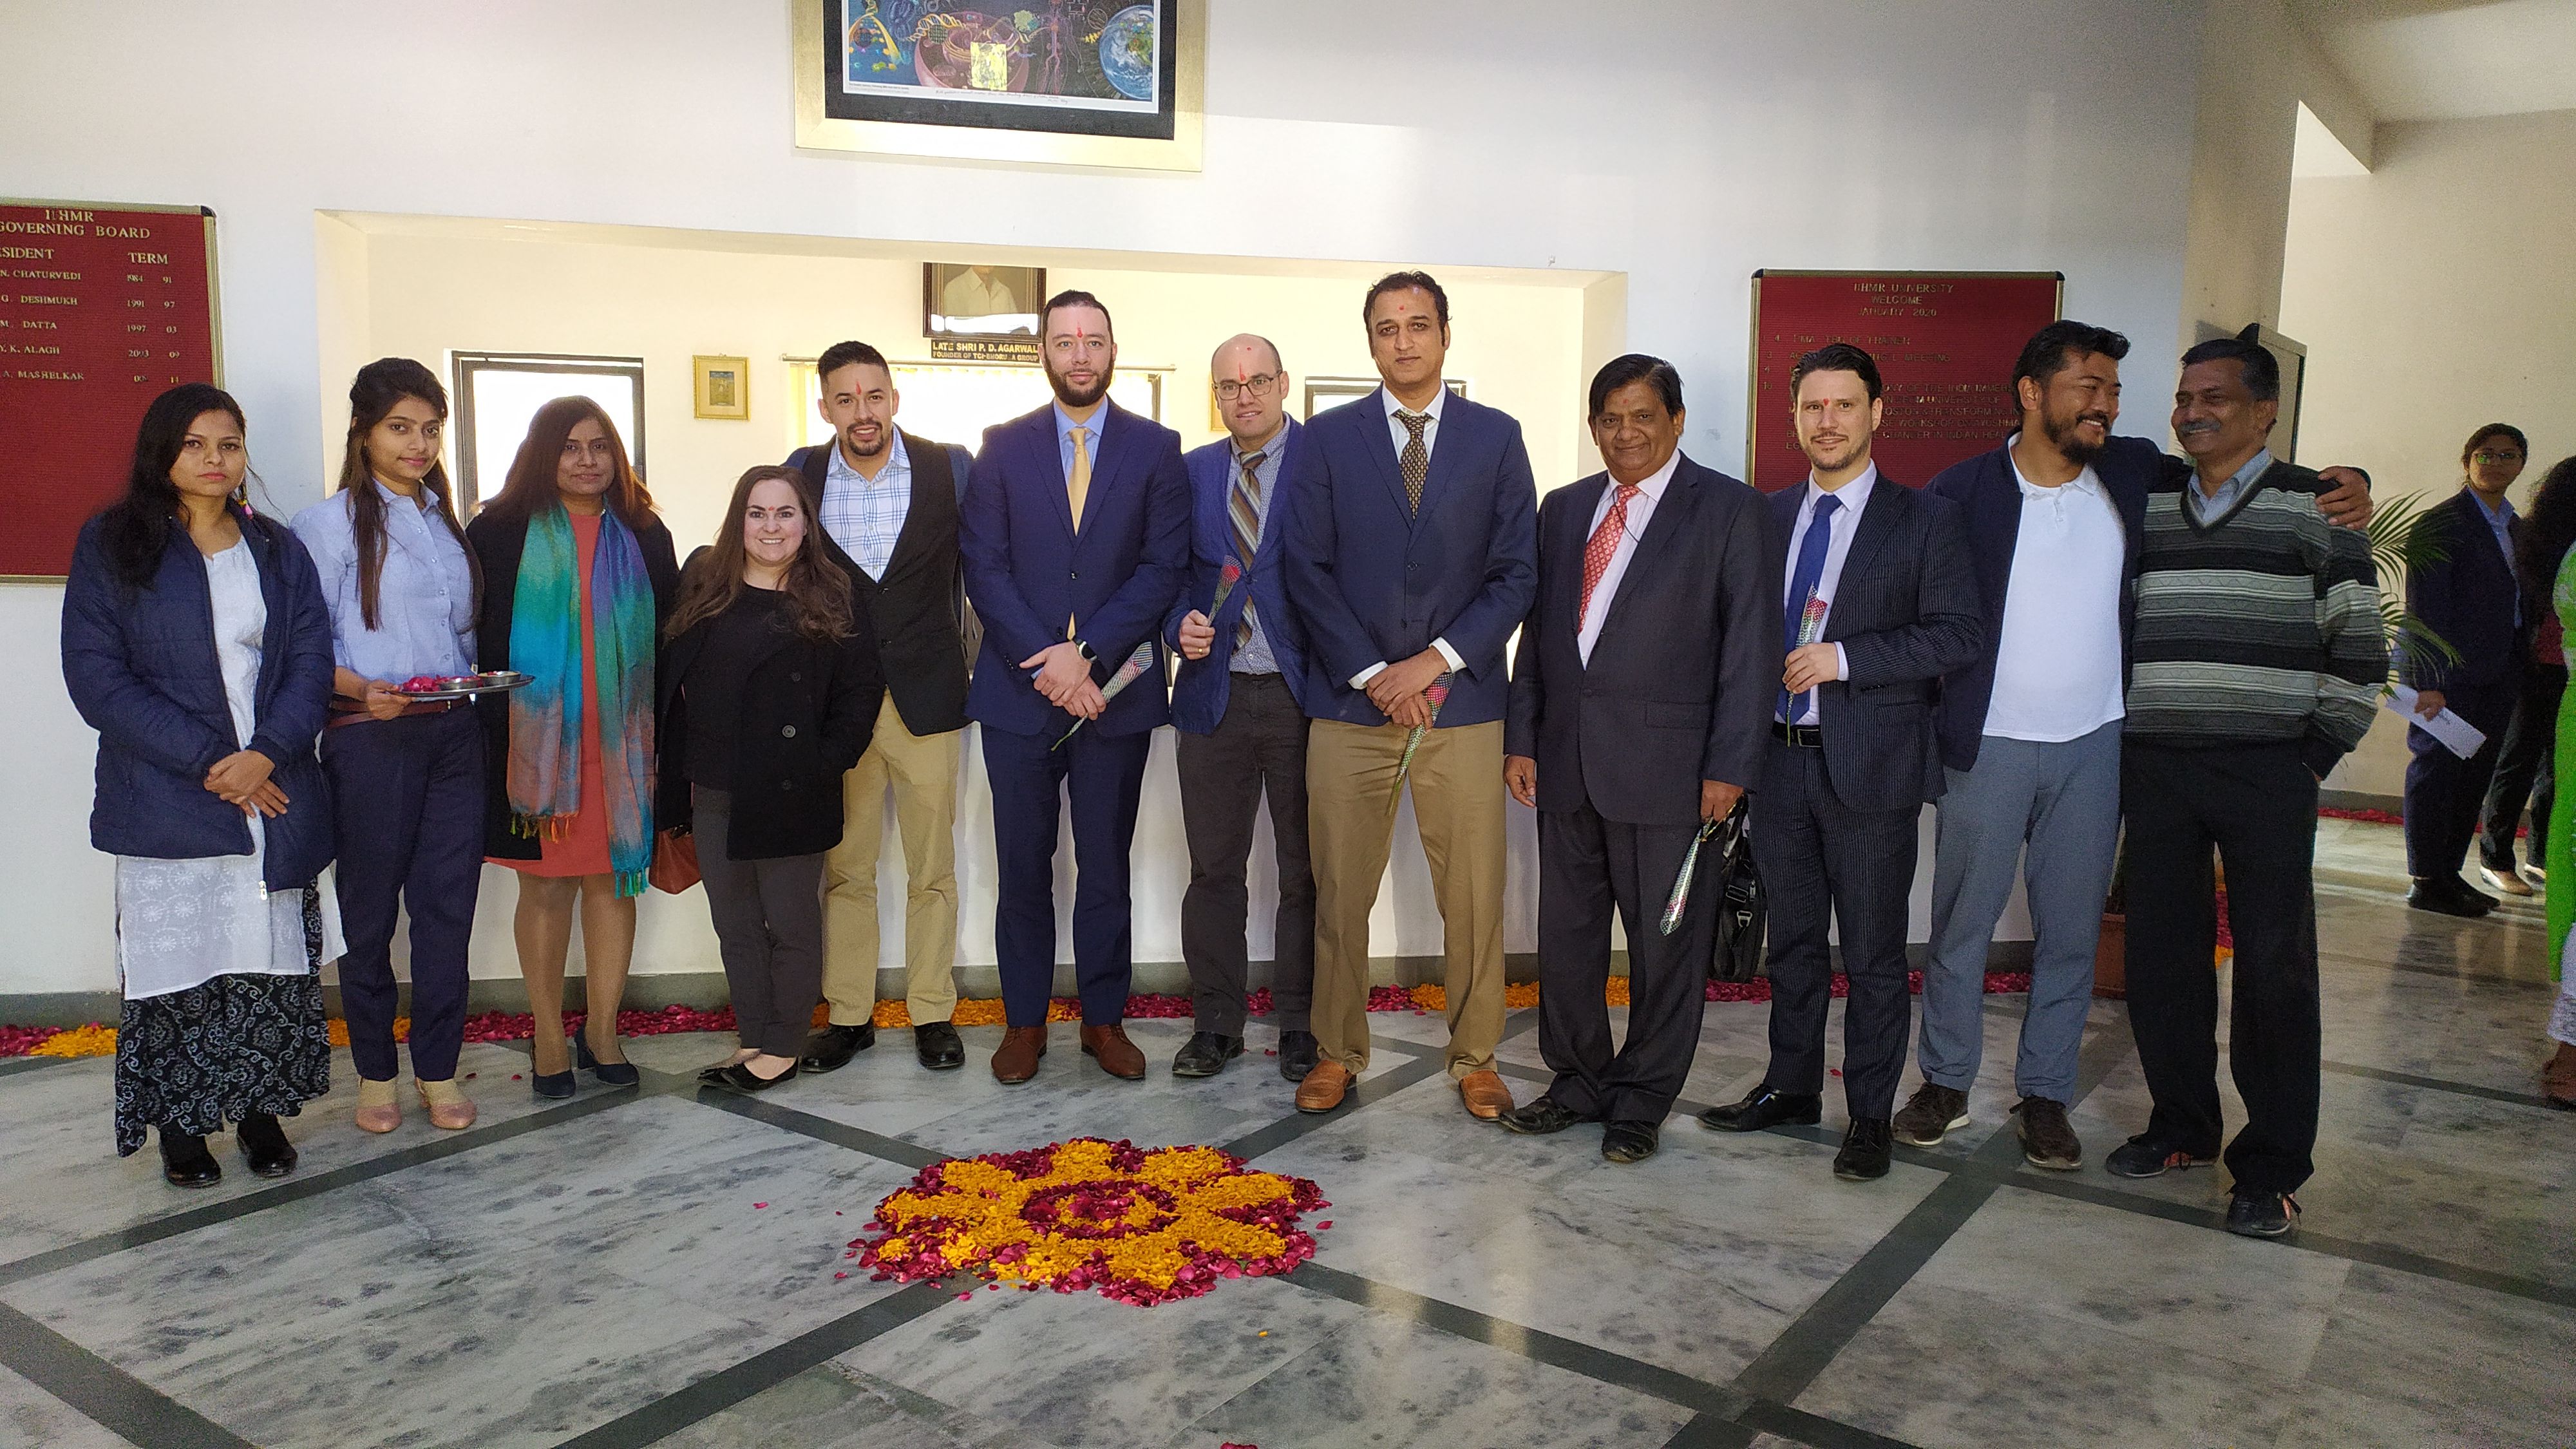 The Inaugural Ceremony of the India Immersion Visit of a student delegation from the University of Massachusetts Boston took place on 10 January 2020, at IIHMR University